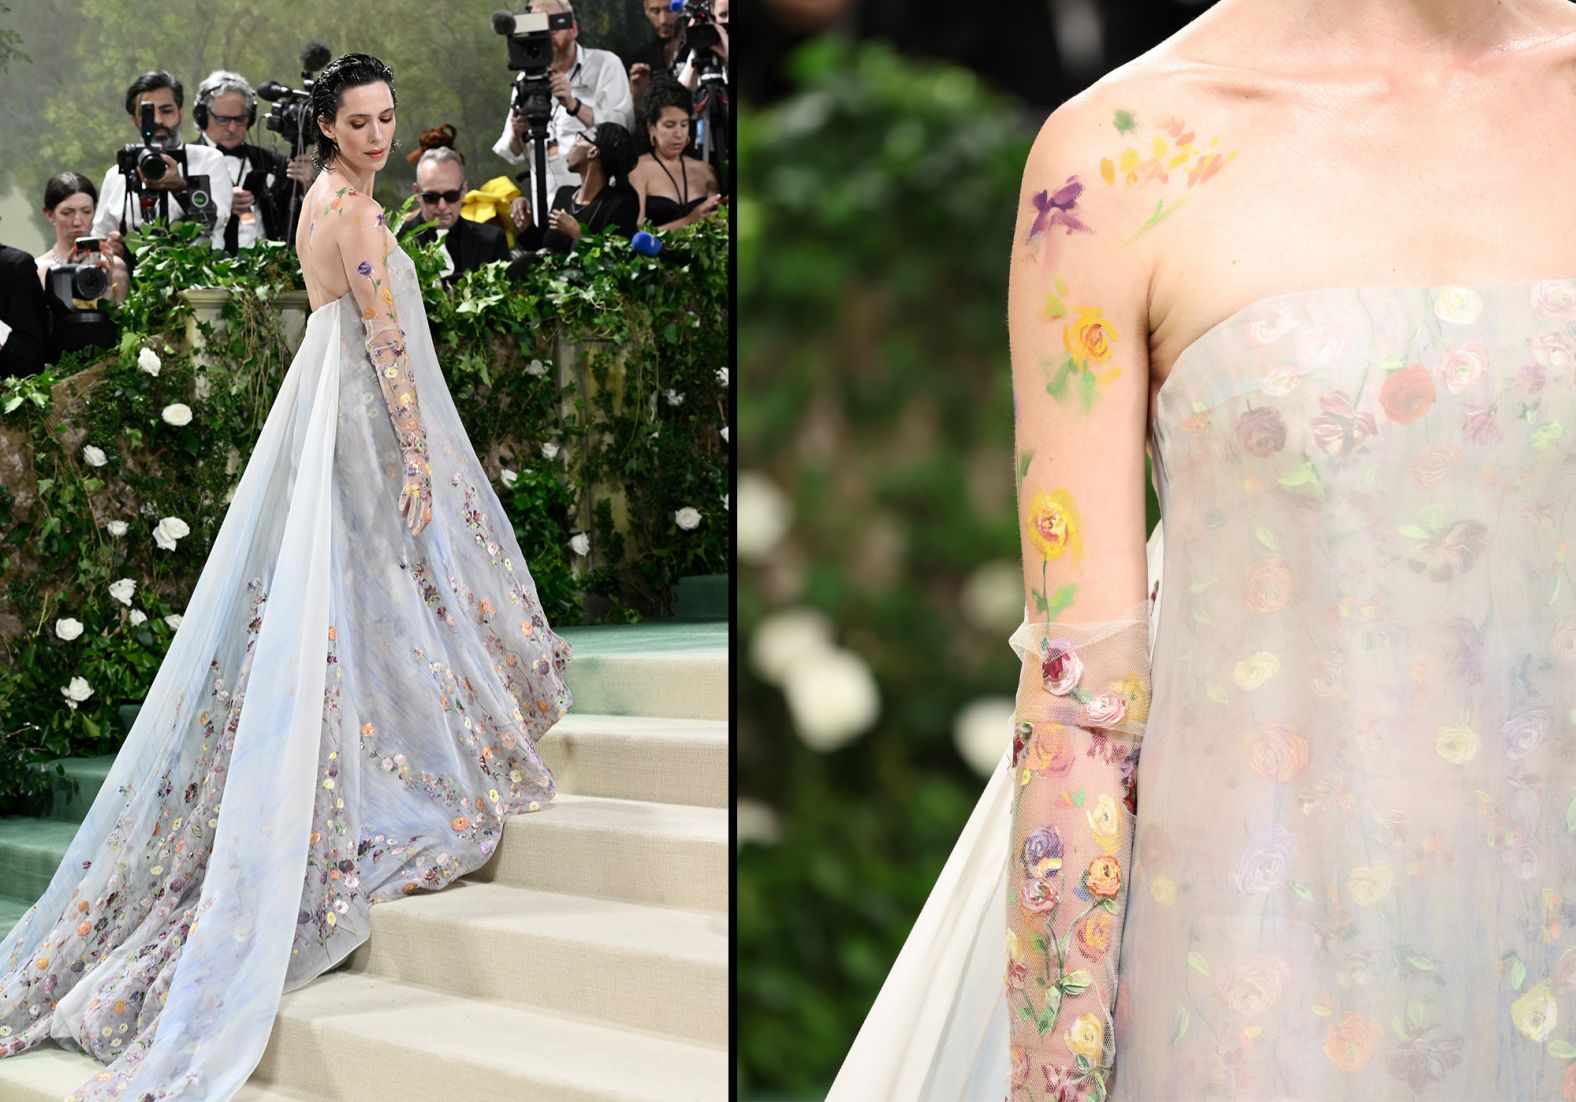 Rebecca Hall wore an ethereal Danielle Frankel dress and floral body paint.